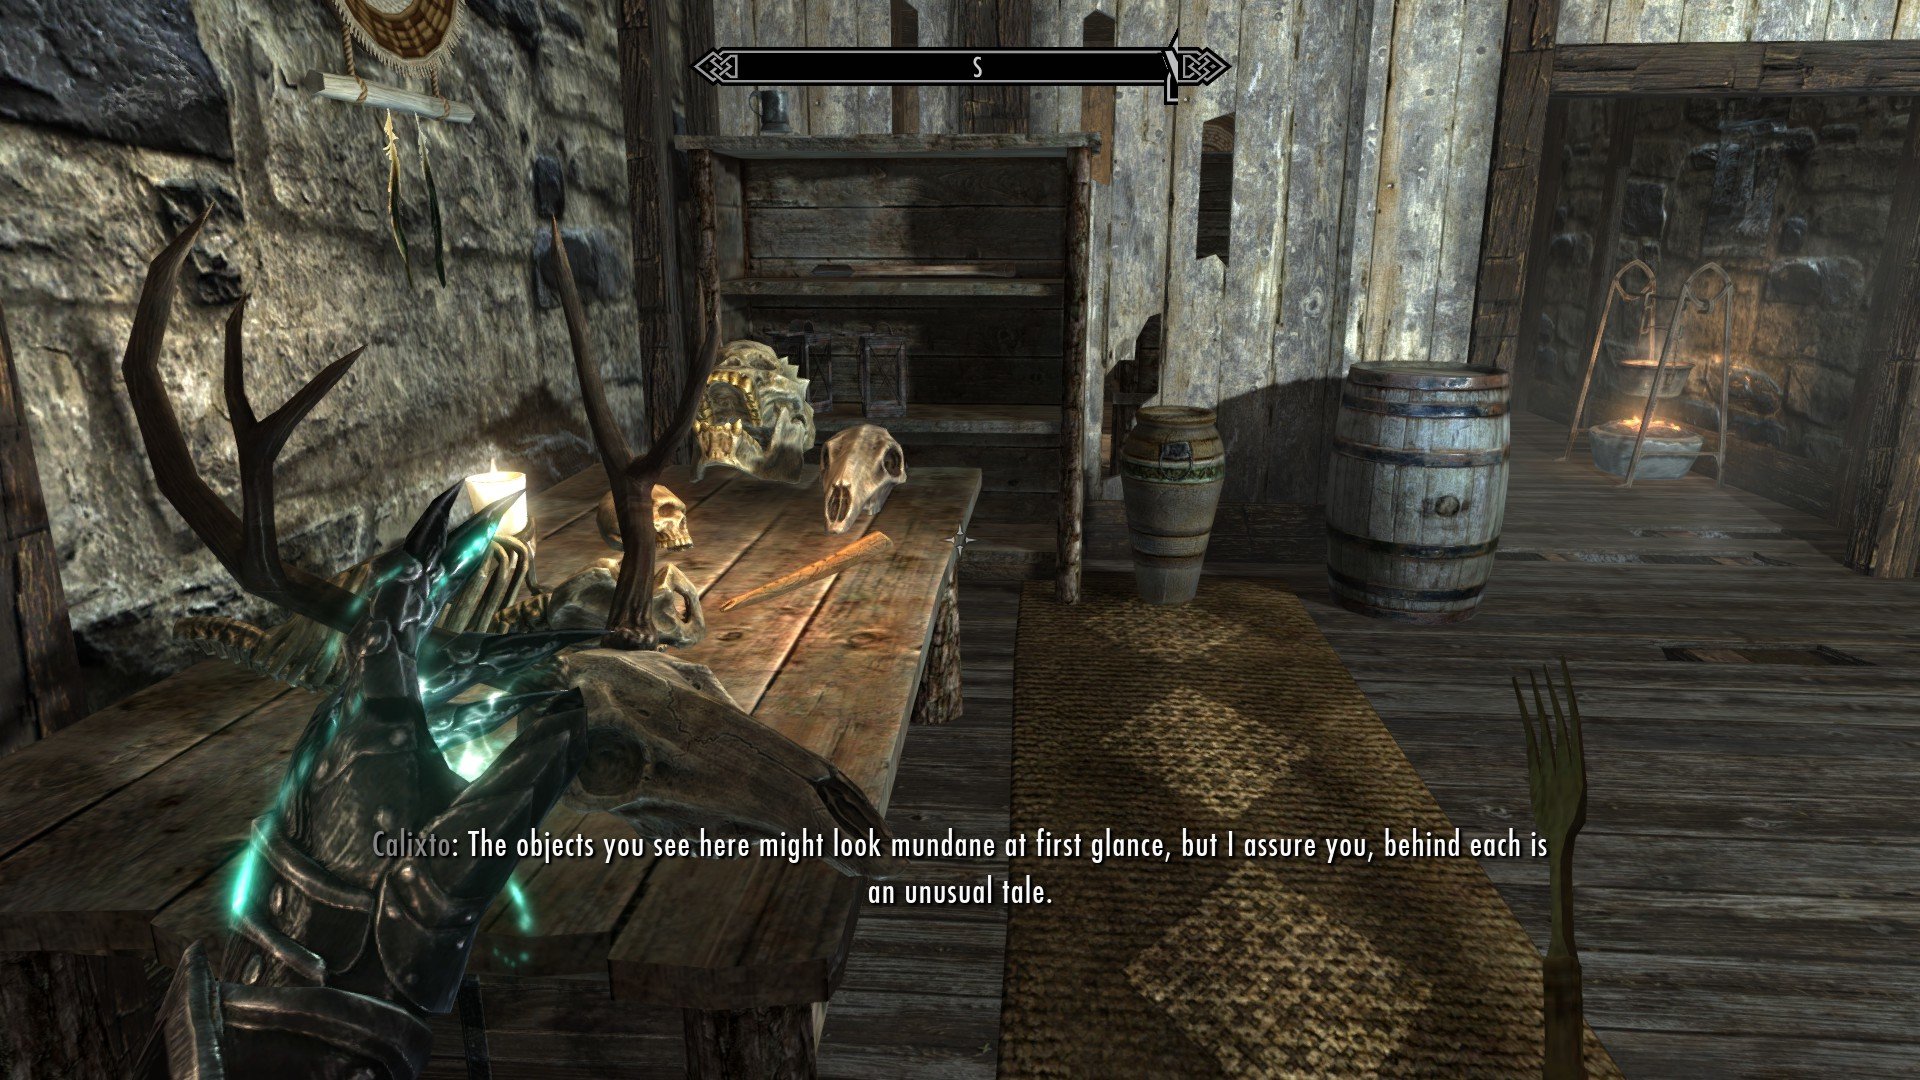 Arrow-in-the-knee and other stuff you never missed in Skyrim